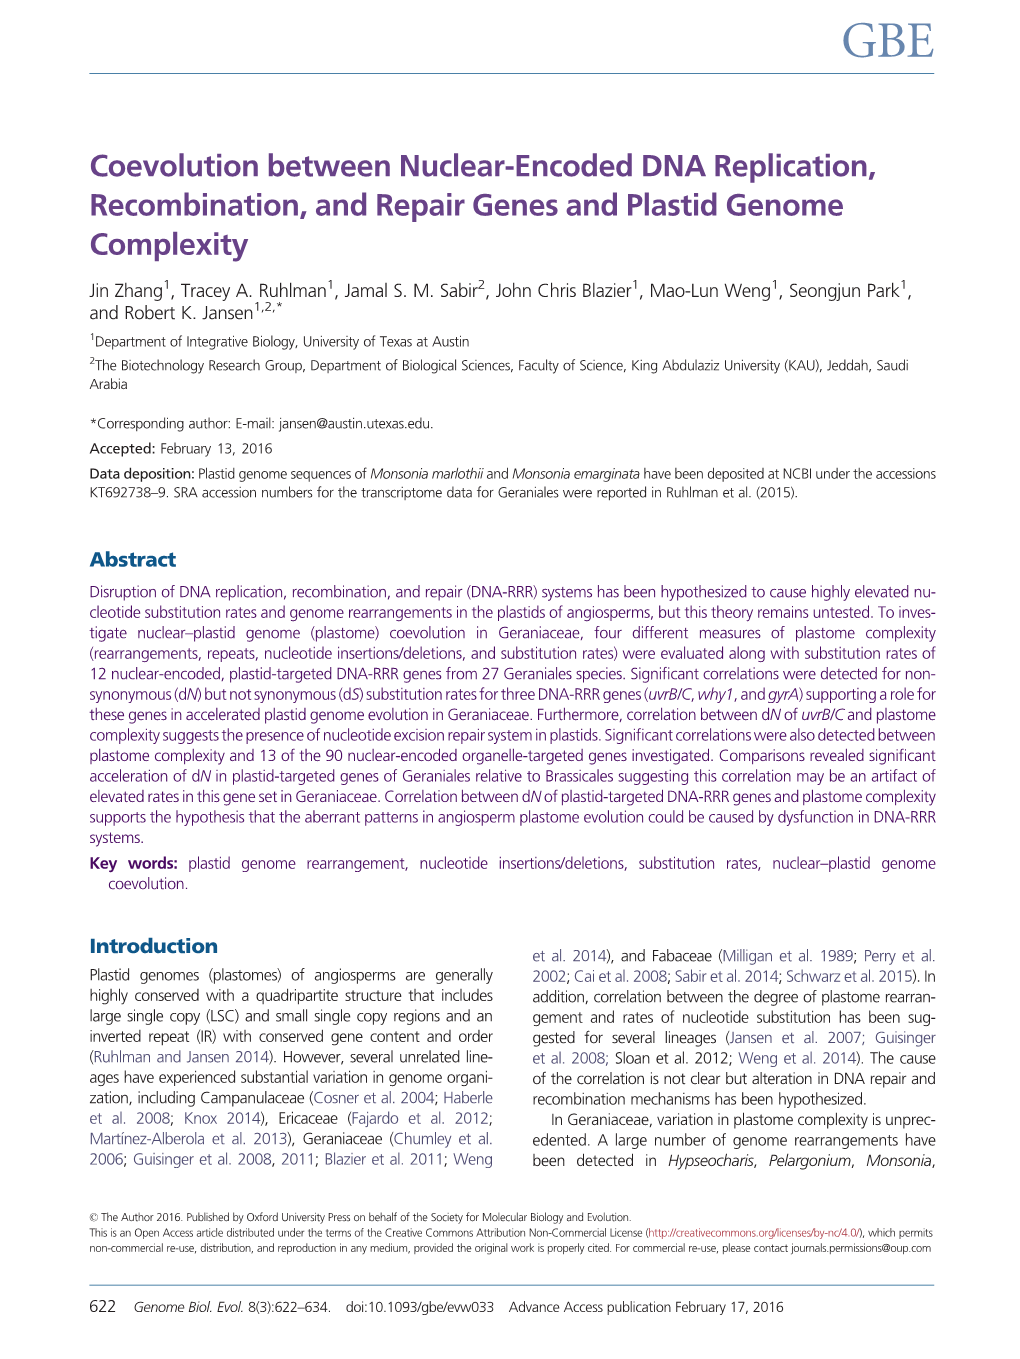 Coevolution Between Nuclear-Encoded DNA Replication, Recombination, and Repair Genes and Plastid Genome Complexity